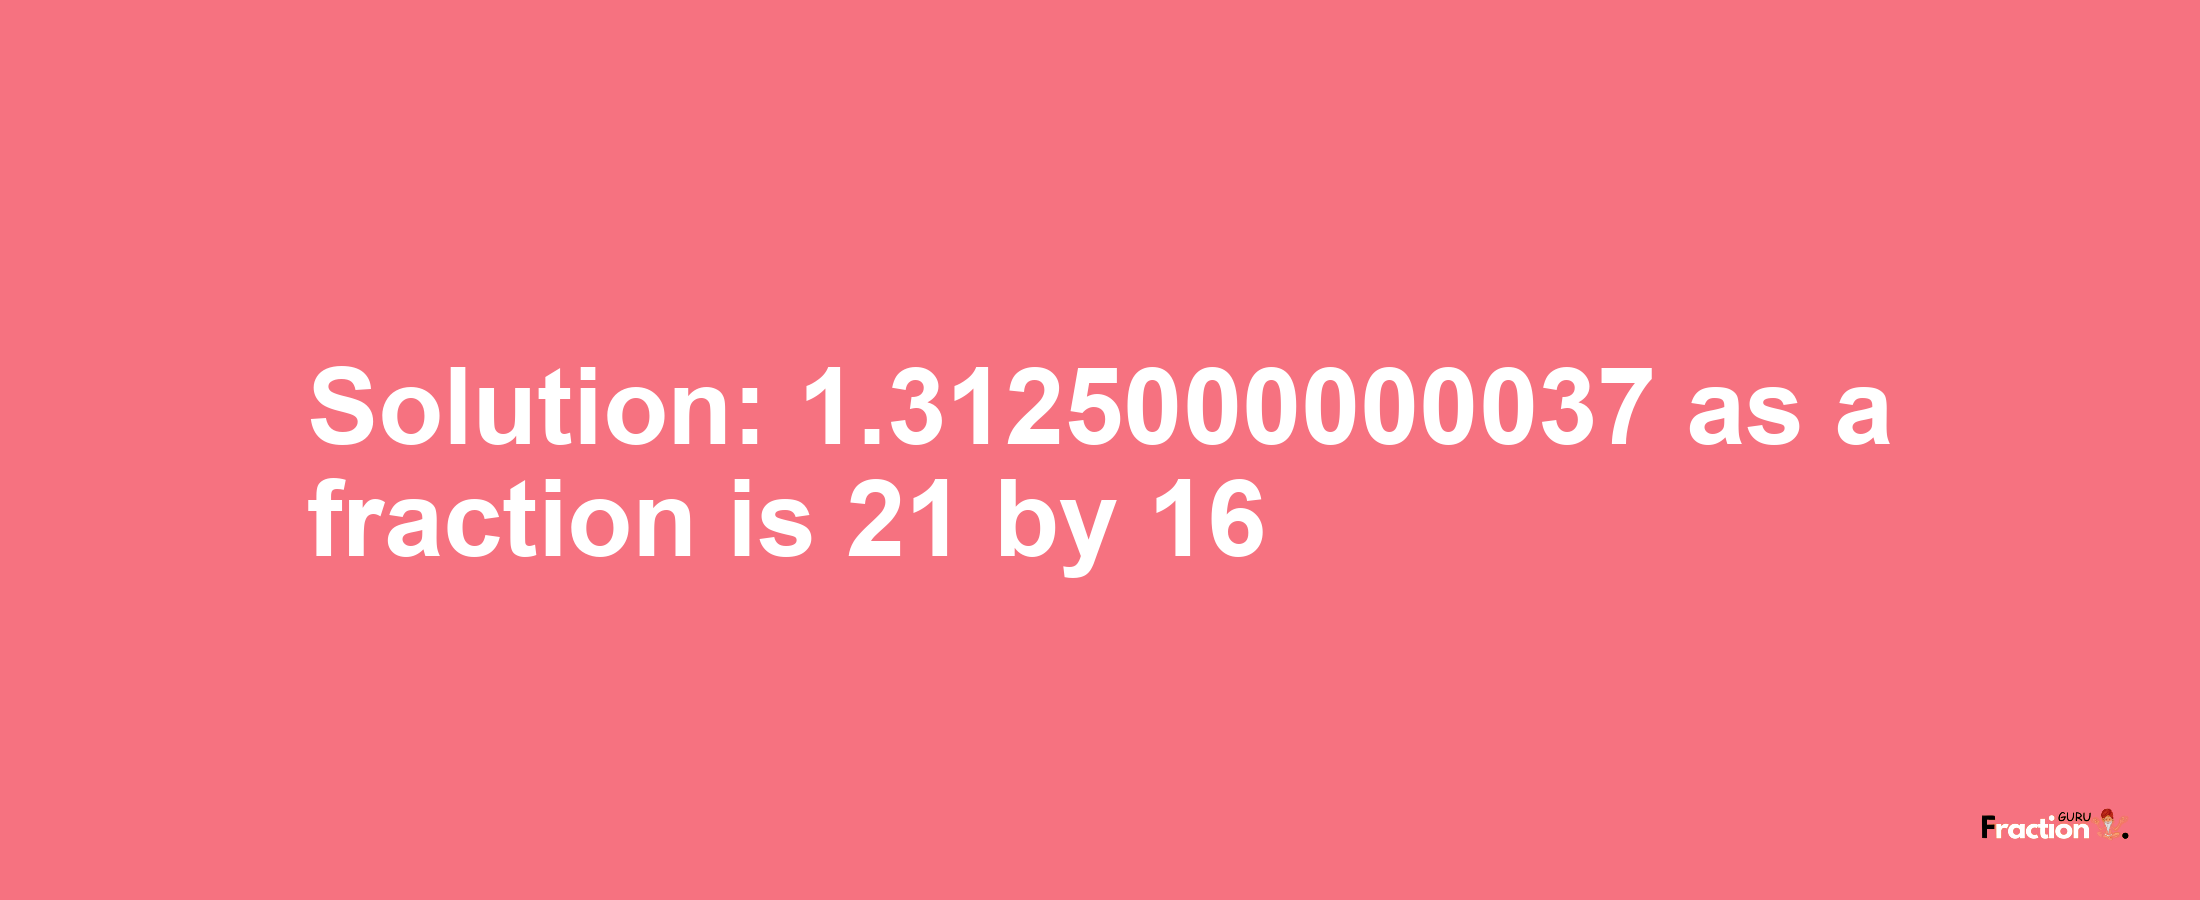 Solution:1.3125000000037 as a fraction is 21/16